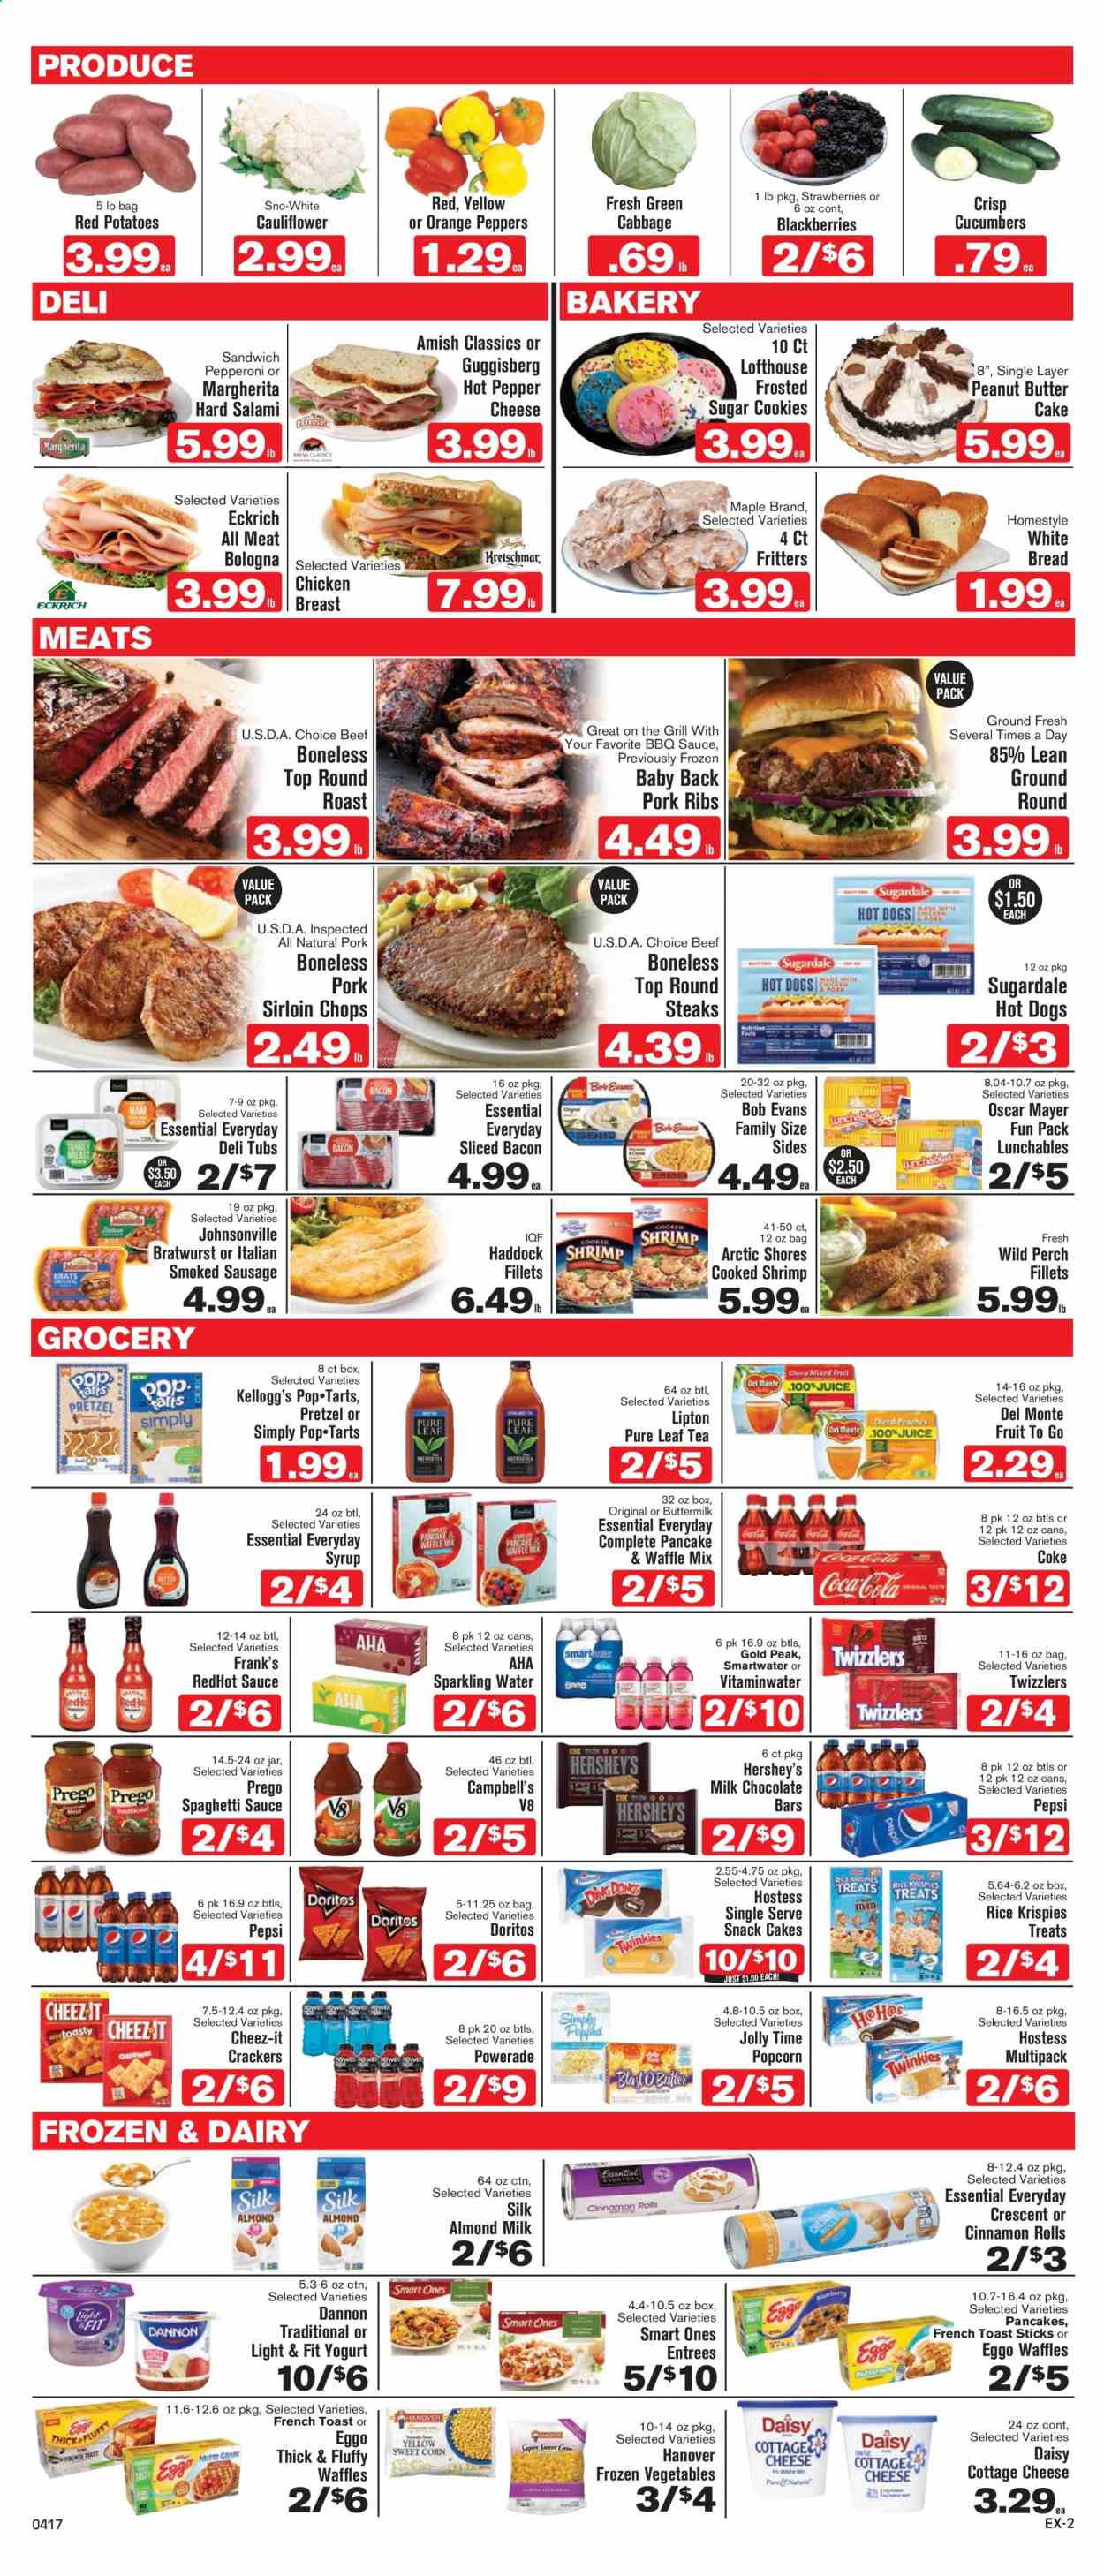 thumbnail - Shop ‘n Save Express Flyer - 04/17/2021 - 04/23/2021 - Sales products - bread, white bread, pretzels, cake, cinnamon roll, waffles, butter cake, cabbage, cauliflower, cucumber, potatoes, peppers, red potatoes, blackberries, strawberries, oranges, chicken breasts, beef meat, steak, round roast, Johnsonville, Bob Evans, pork loin, pork meat, pork ribs, pork back ribs, haddock, perch, shrimps, Arctic Shores, Campbell's, spaghetti, hot dog, sandwich, pancakes, Lunchables, spaghetti sauce, Sugardale, bacon, salami, bologna sausage, Oscar Mayer, bratwurst, sausage, smoked sausage, pepperoni, cottage cheese, cheese, yoghurt, Dannon, almond milk, buttermilk, Hershey's, frozen vegetables, cookies, milk chocolate, chocolate, snack, crackers, Kellogg's, Doritos, popcorn, Cheez-It, sugar, Rice Krispies, pepper, BBQ sauce, peanut butter, syrup, Coca-Cola, Powerade, Pepsi, Lipton, sparkling water, tea, Pure Leaf. Page 2.